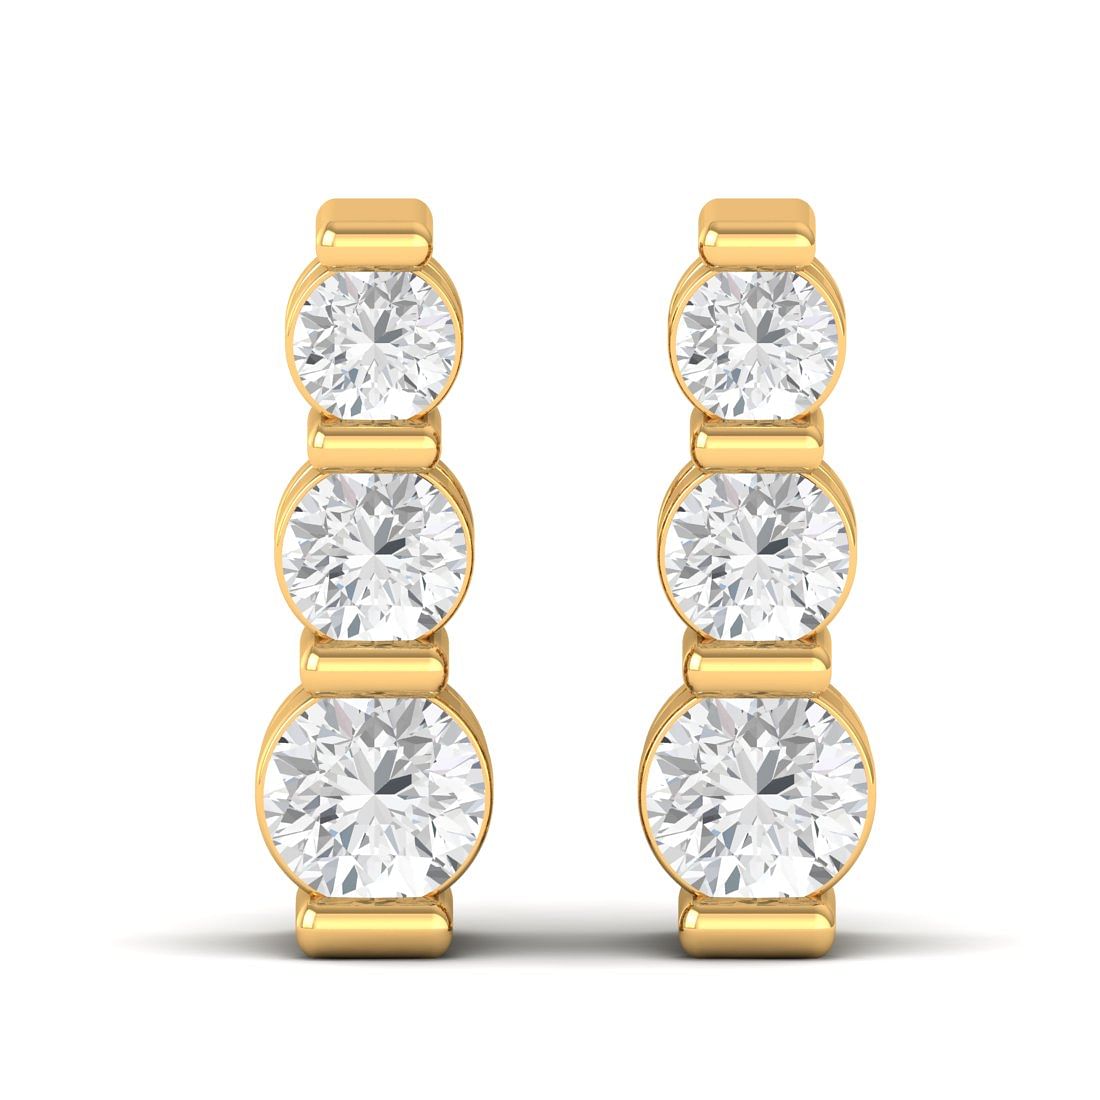 Yellow Gold Zoey Diamond Earrings For Engagement Gift